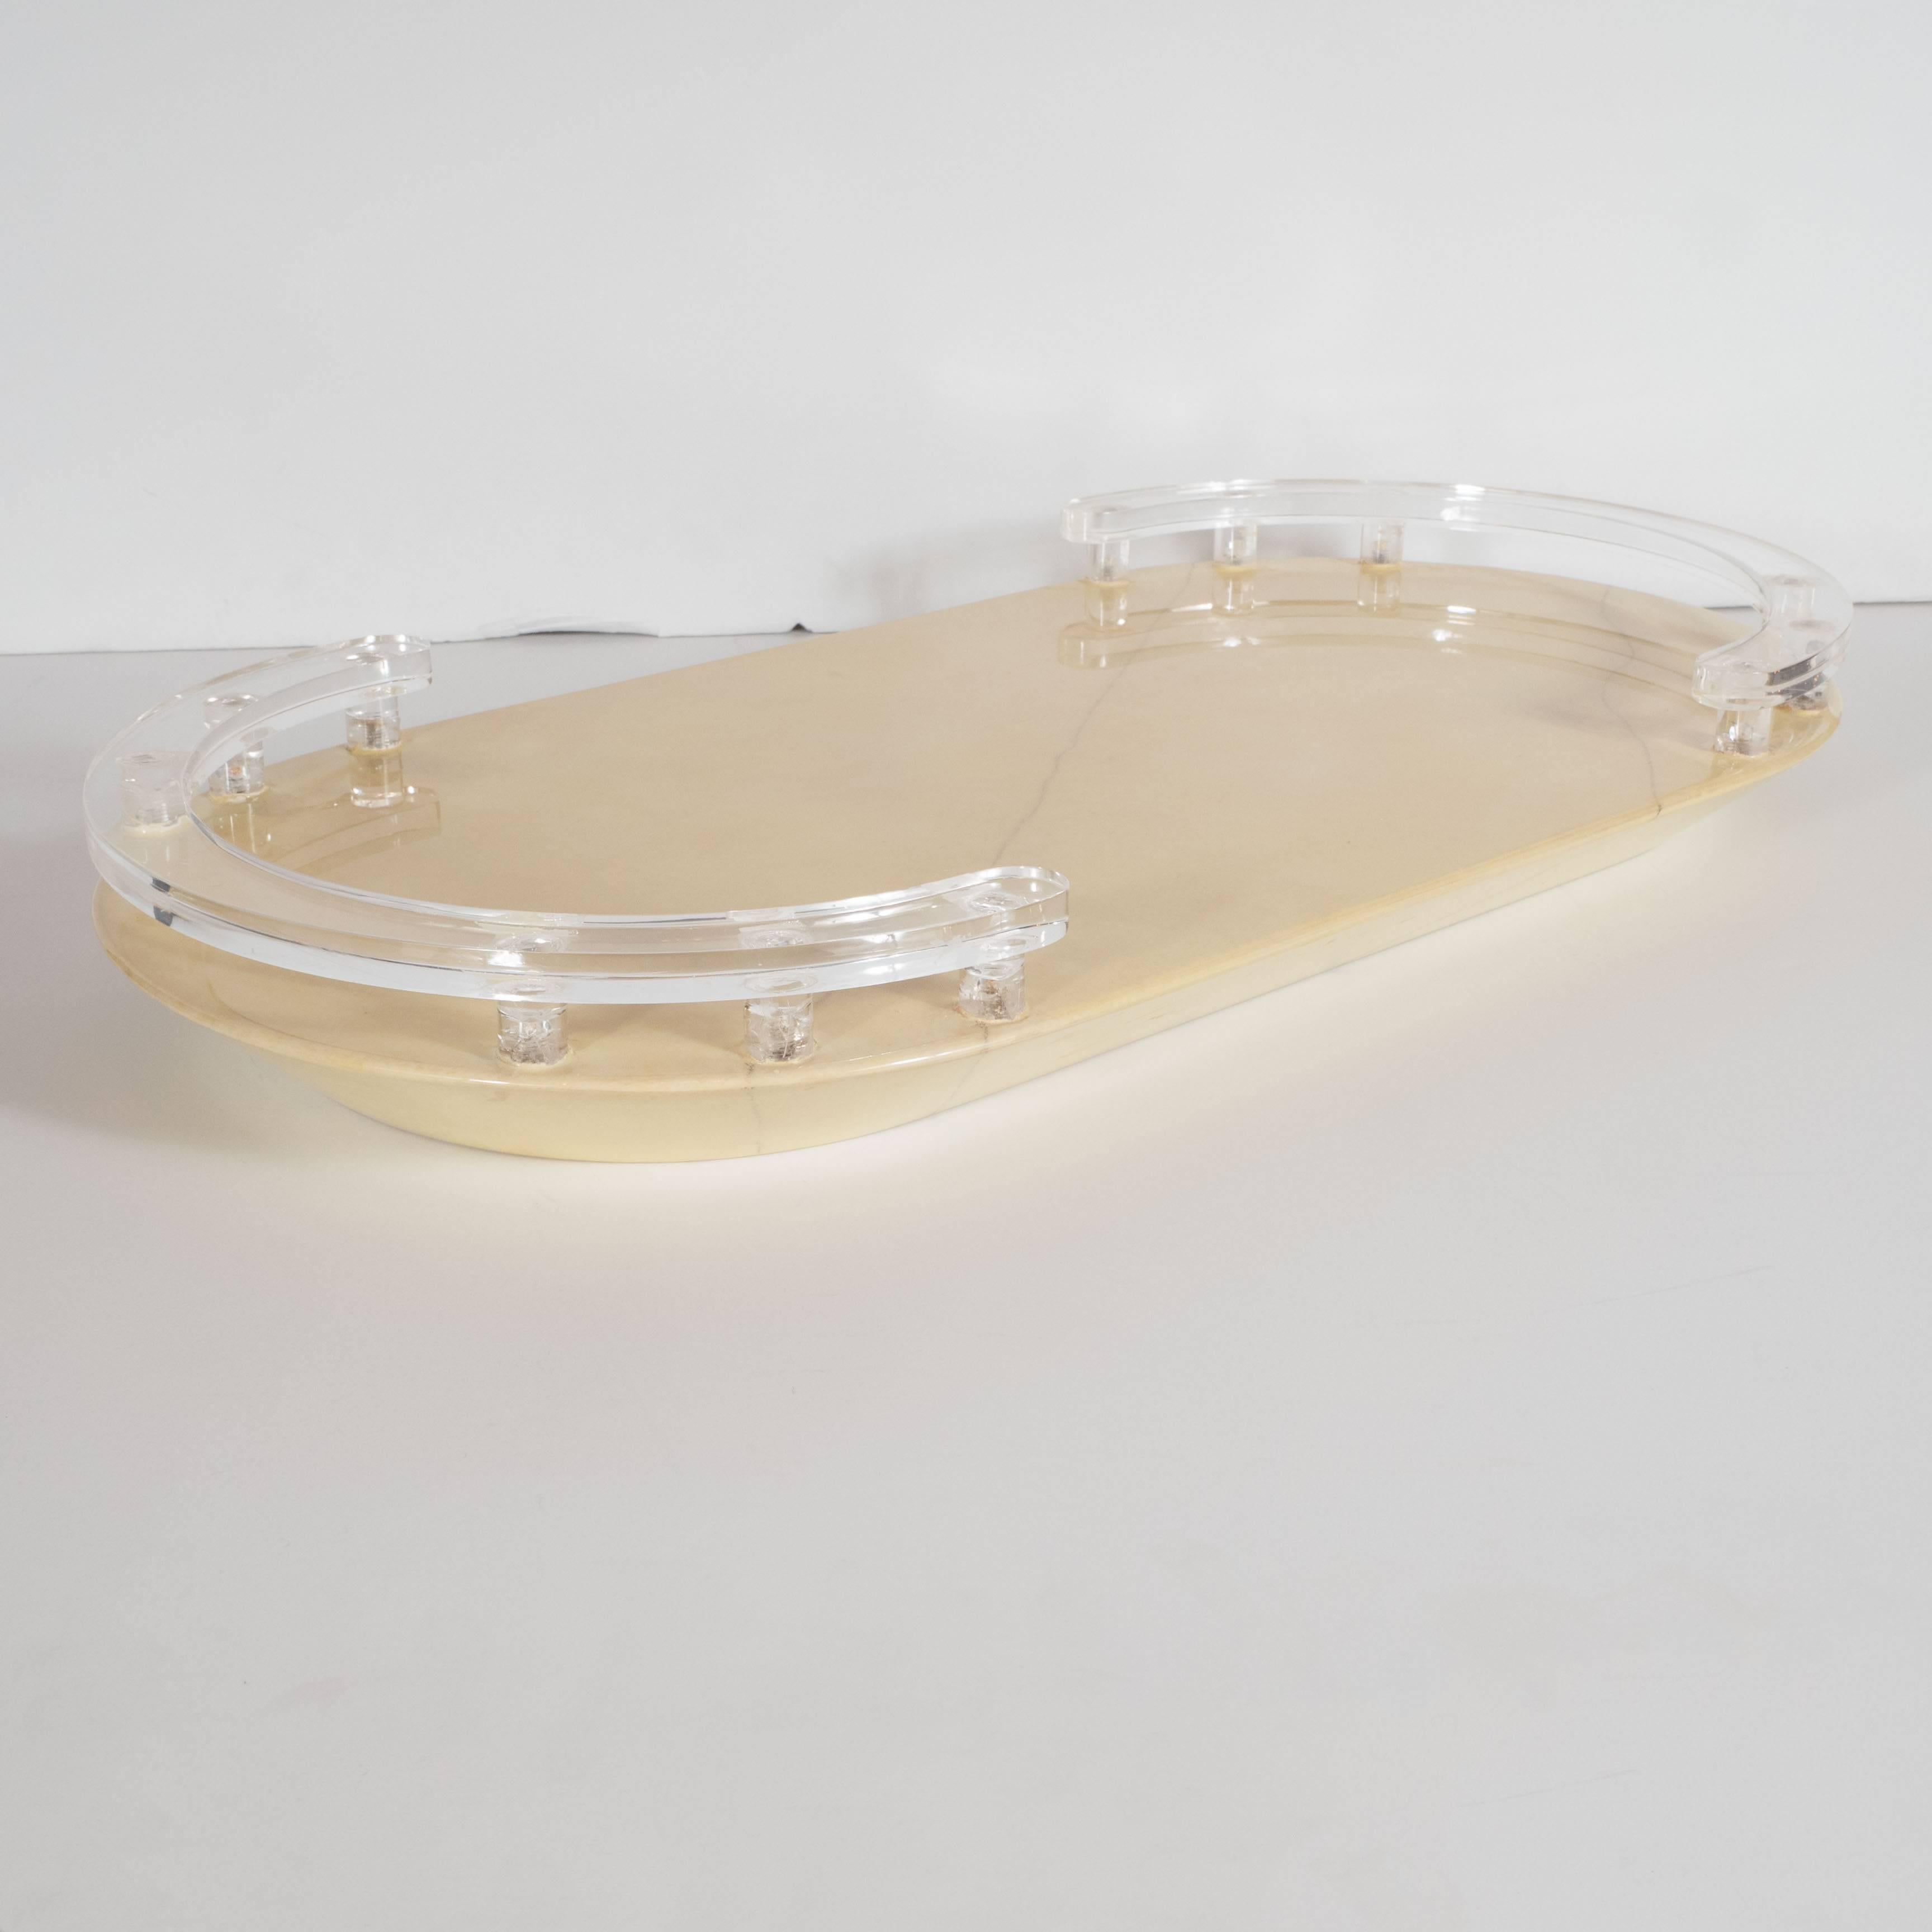 This very sophisticated lacquered goatskin tray is in hues of cream with an angled edge with a supporting Lucite rail on either end. A wonderful decorative a well as functional piece. Very much in the Manner of Karl Springer. This would make a